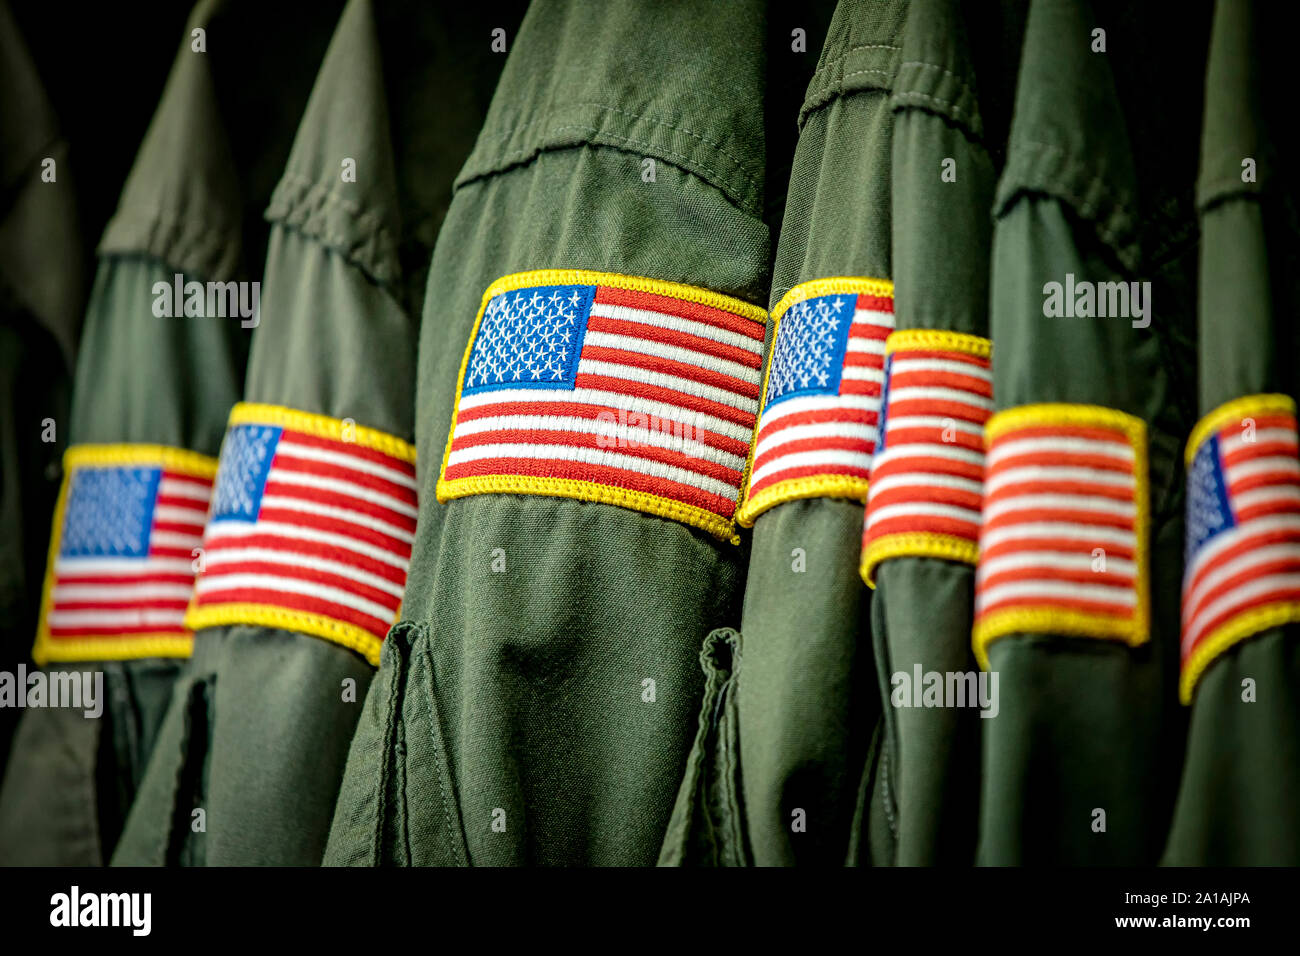 Flight suits in row hanging with American flags on the sleeves Stock Photo